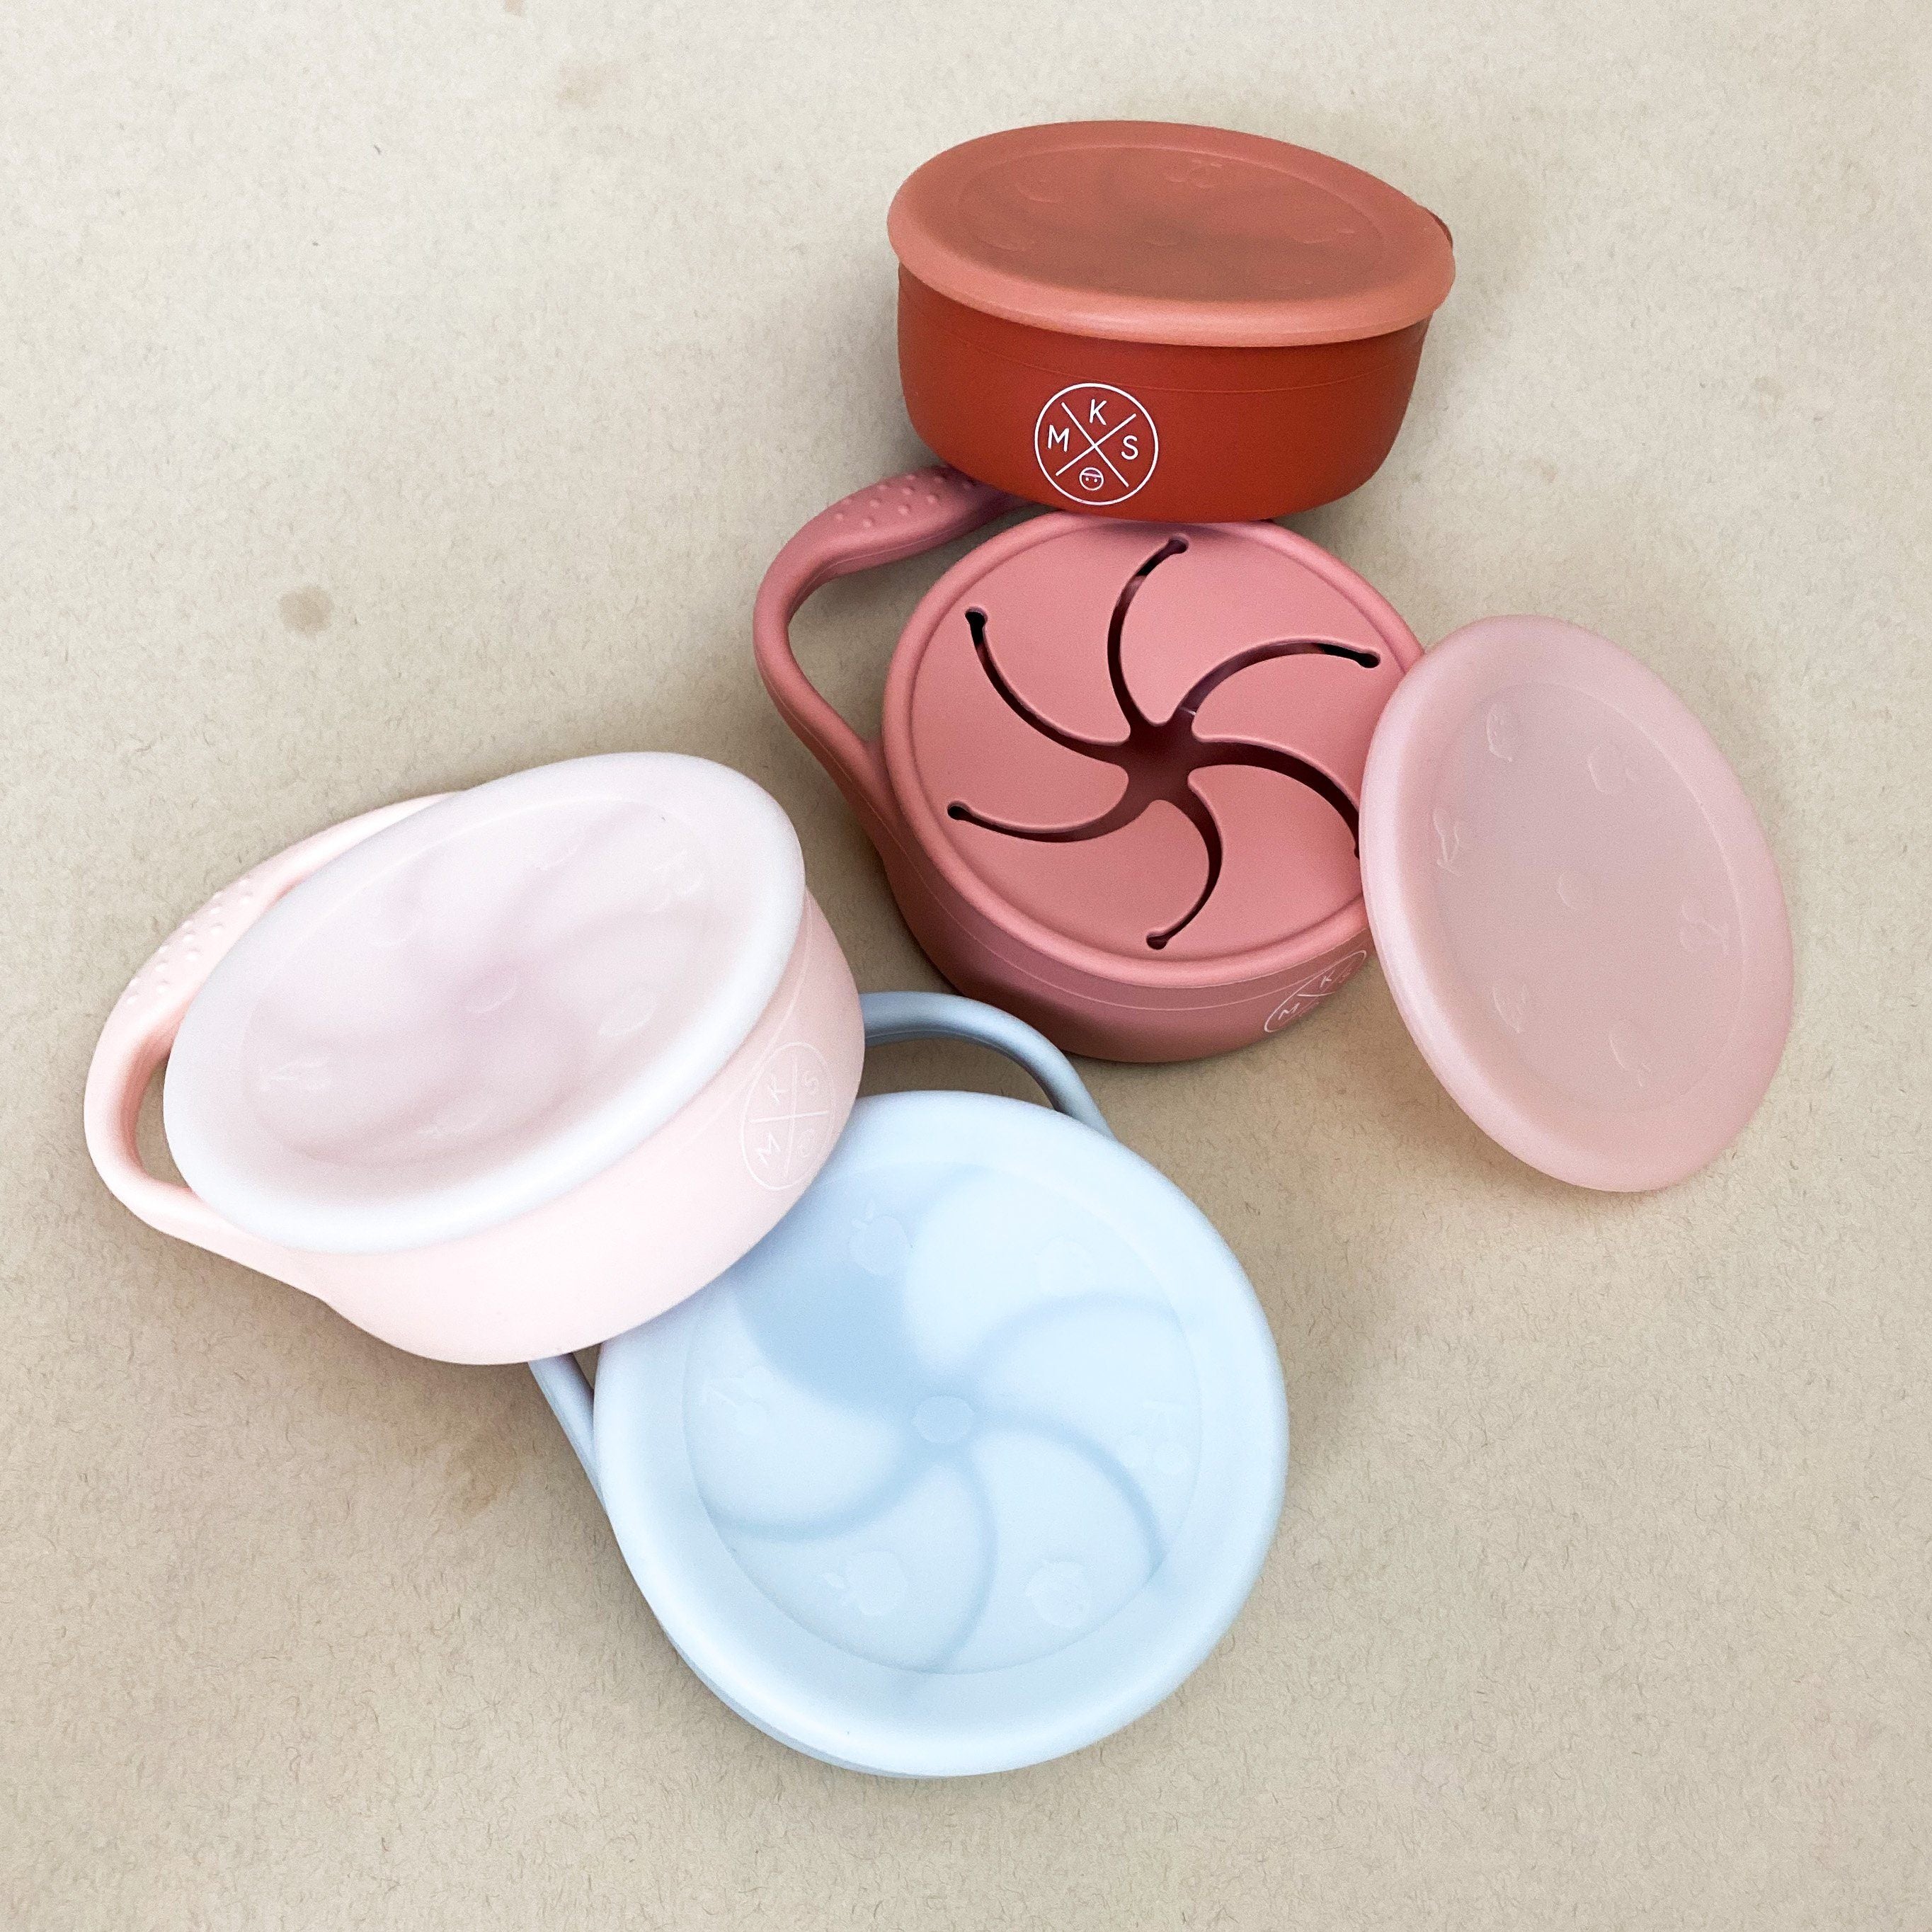 The Saturday Baby - Silicone Snack Cup | Sage